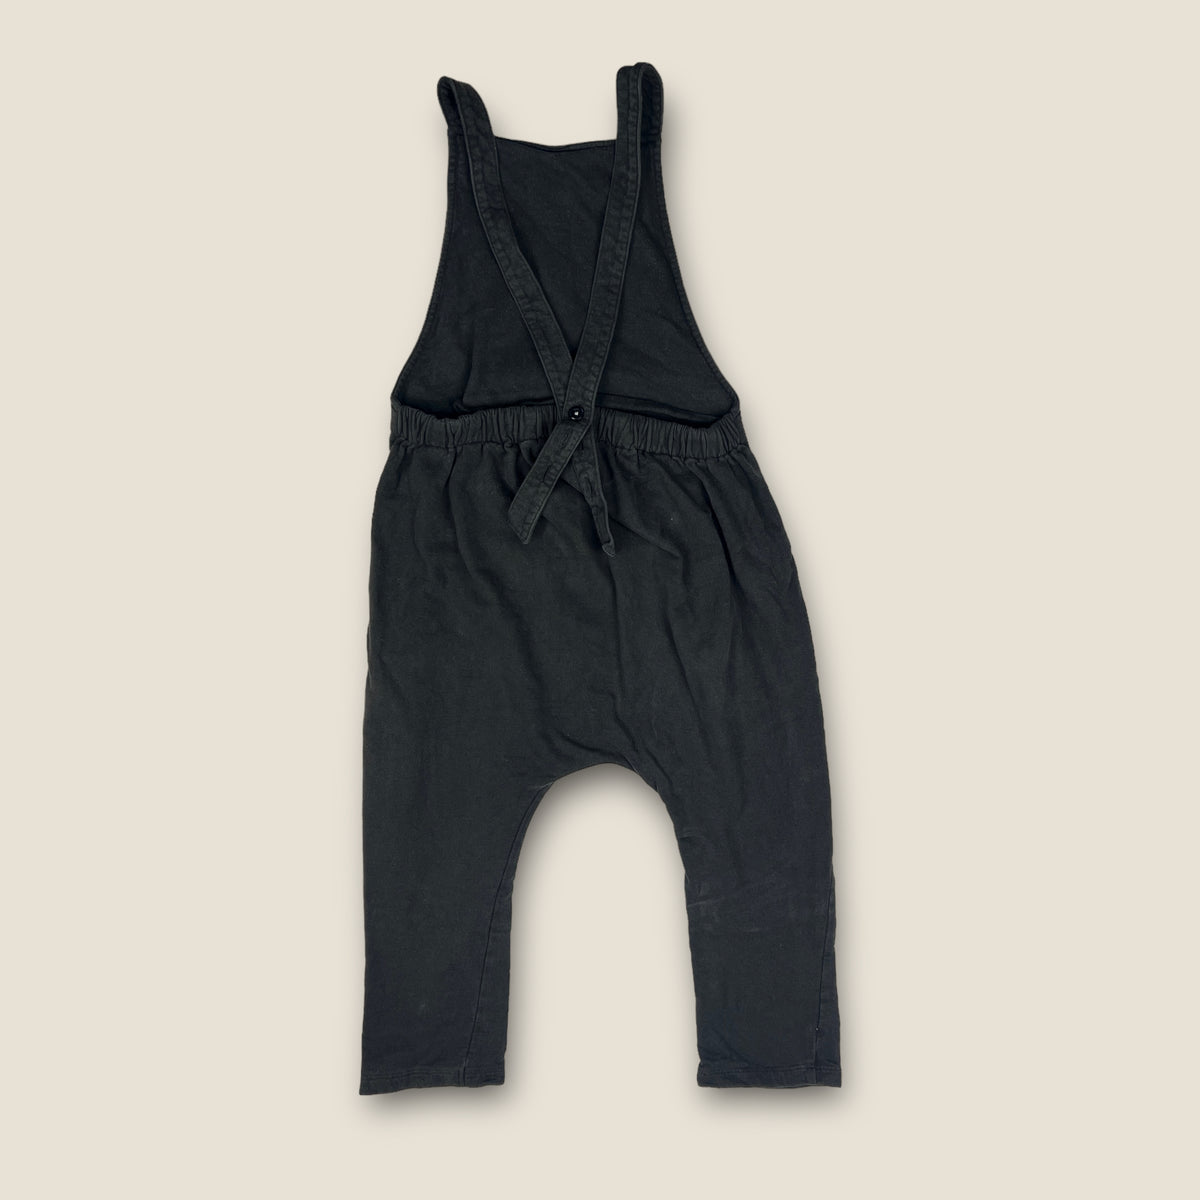 Gray Label Salopettes in Black size 5-6 years